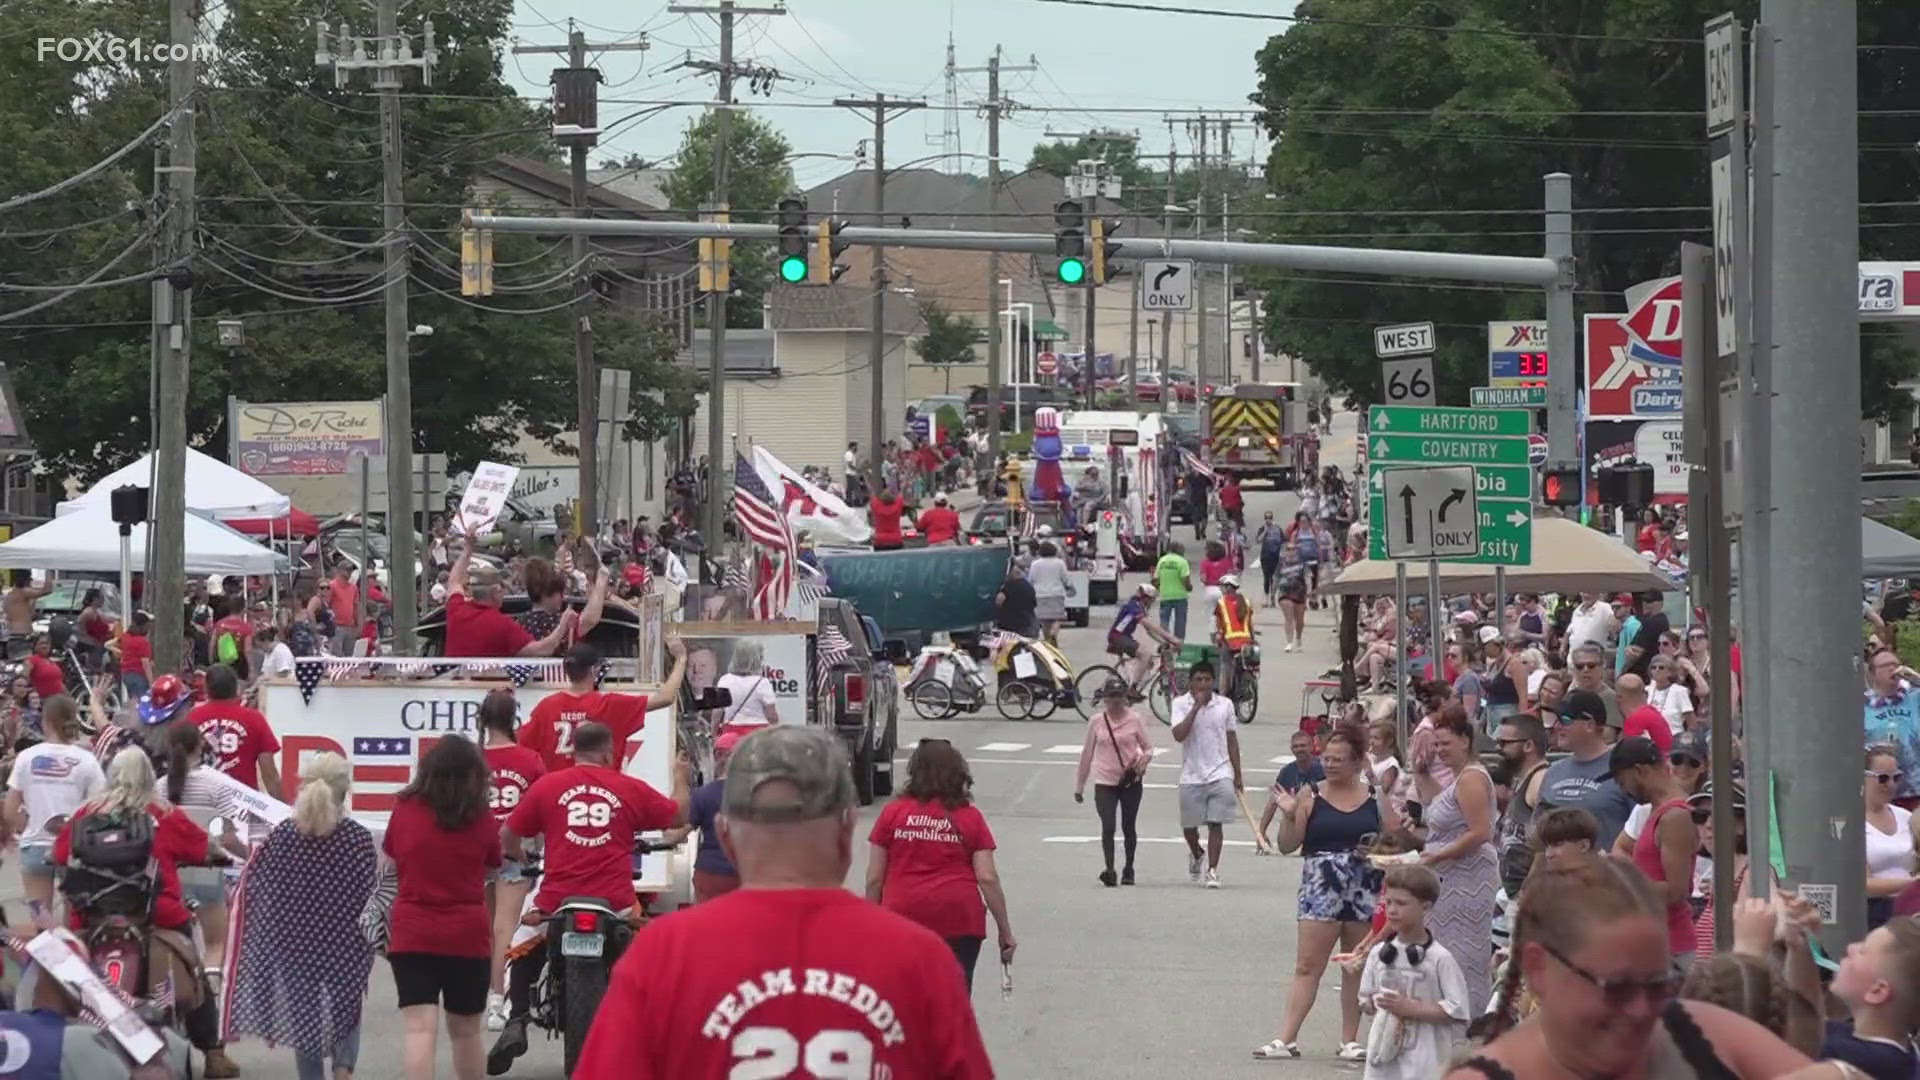 The parade began in 1986 after no marching bands were available for Memorial Day. That July 4, a local radio station played marching band music as thousands marched.